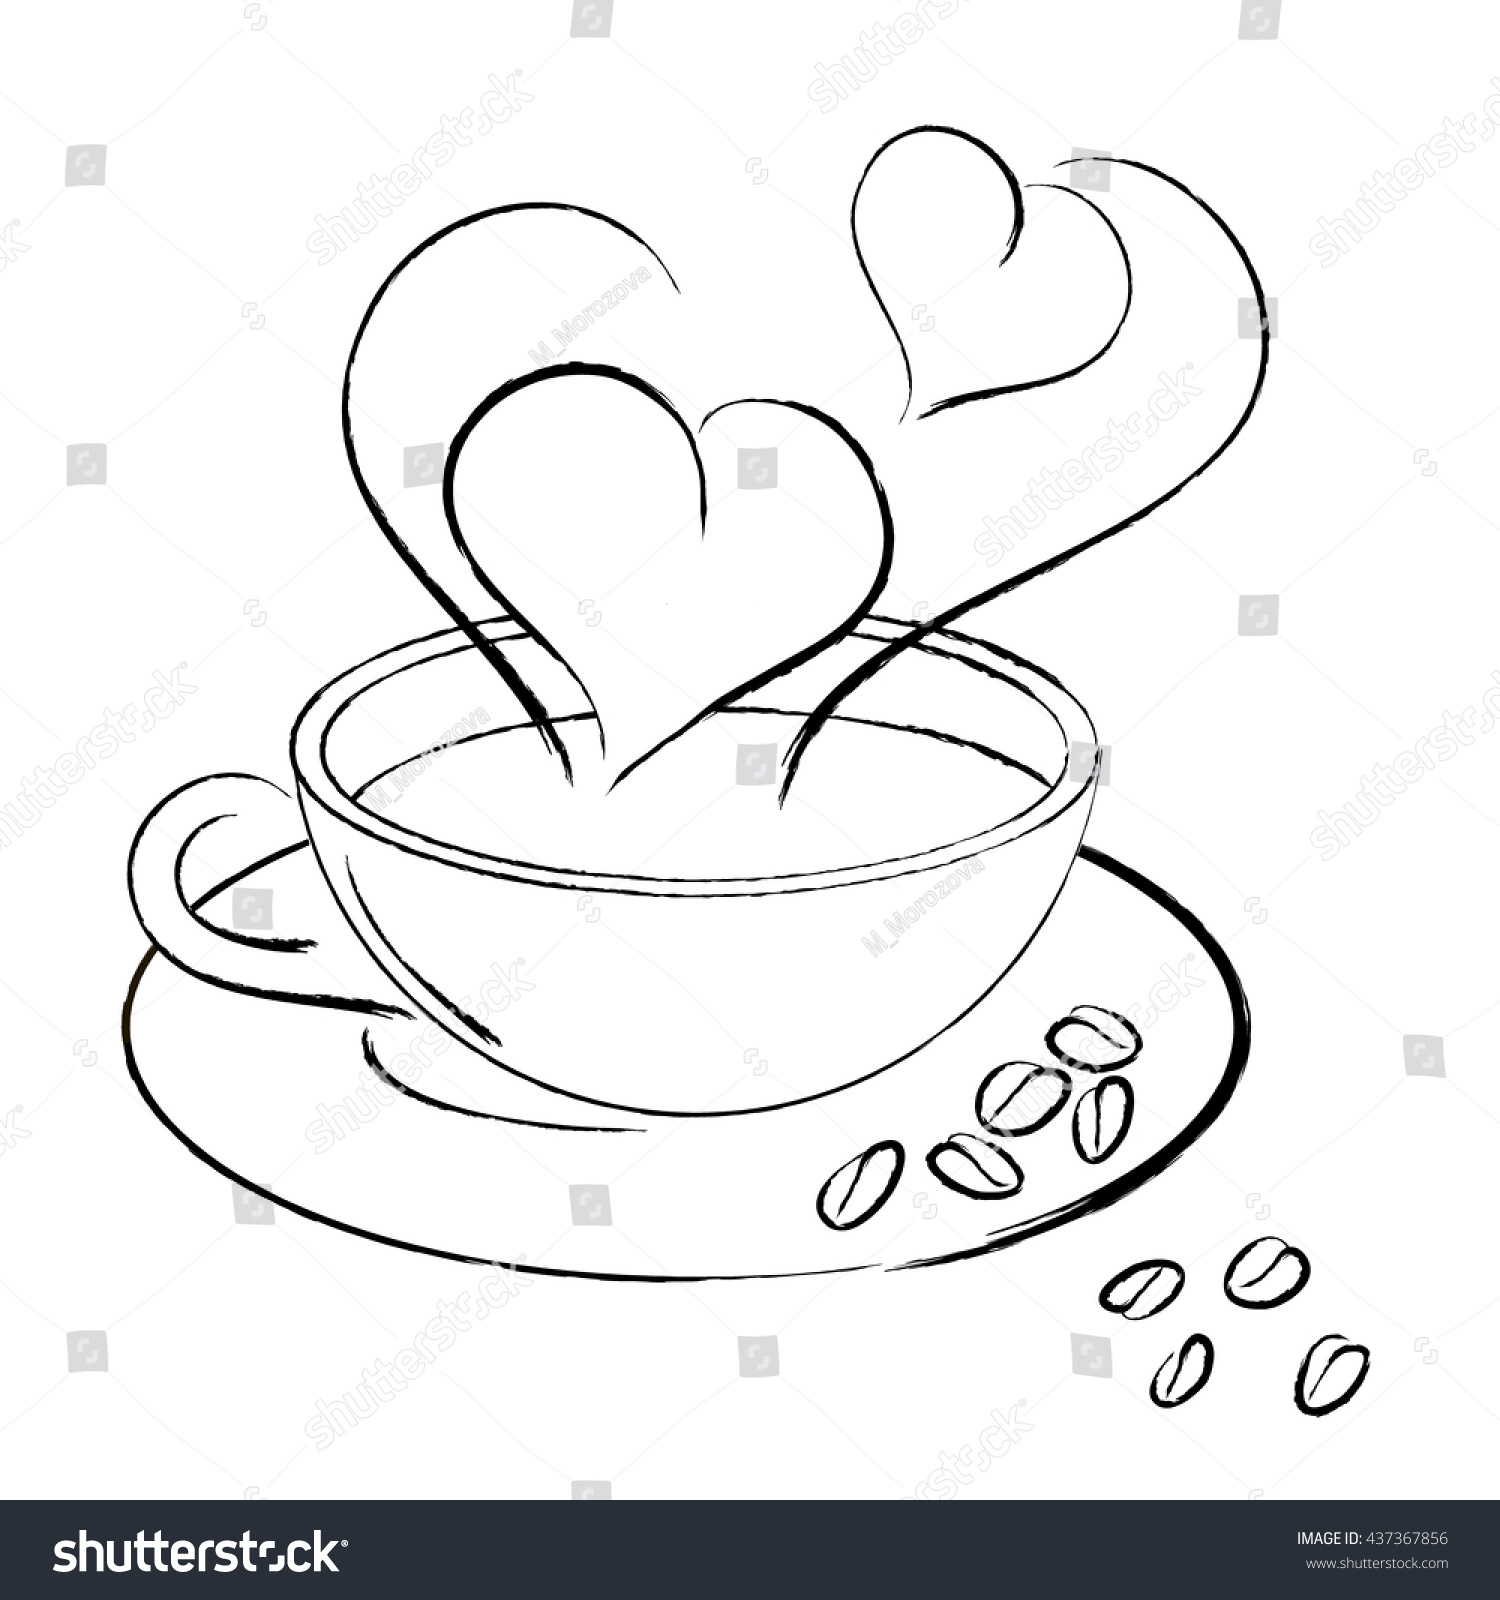 Download White Black Coffee Cup Bean Hearts Stock Vector 437367856 ...